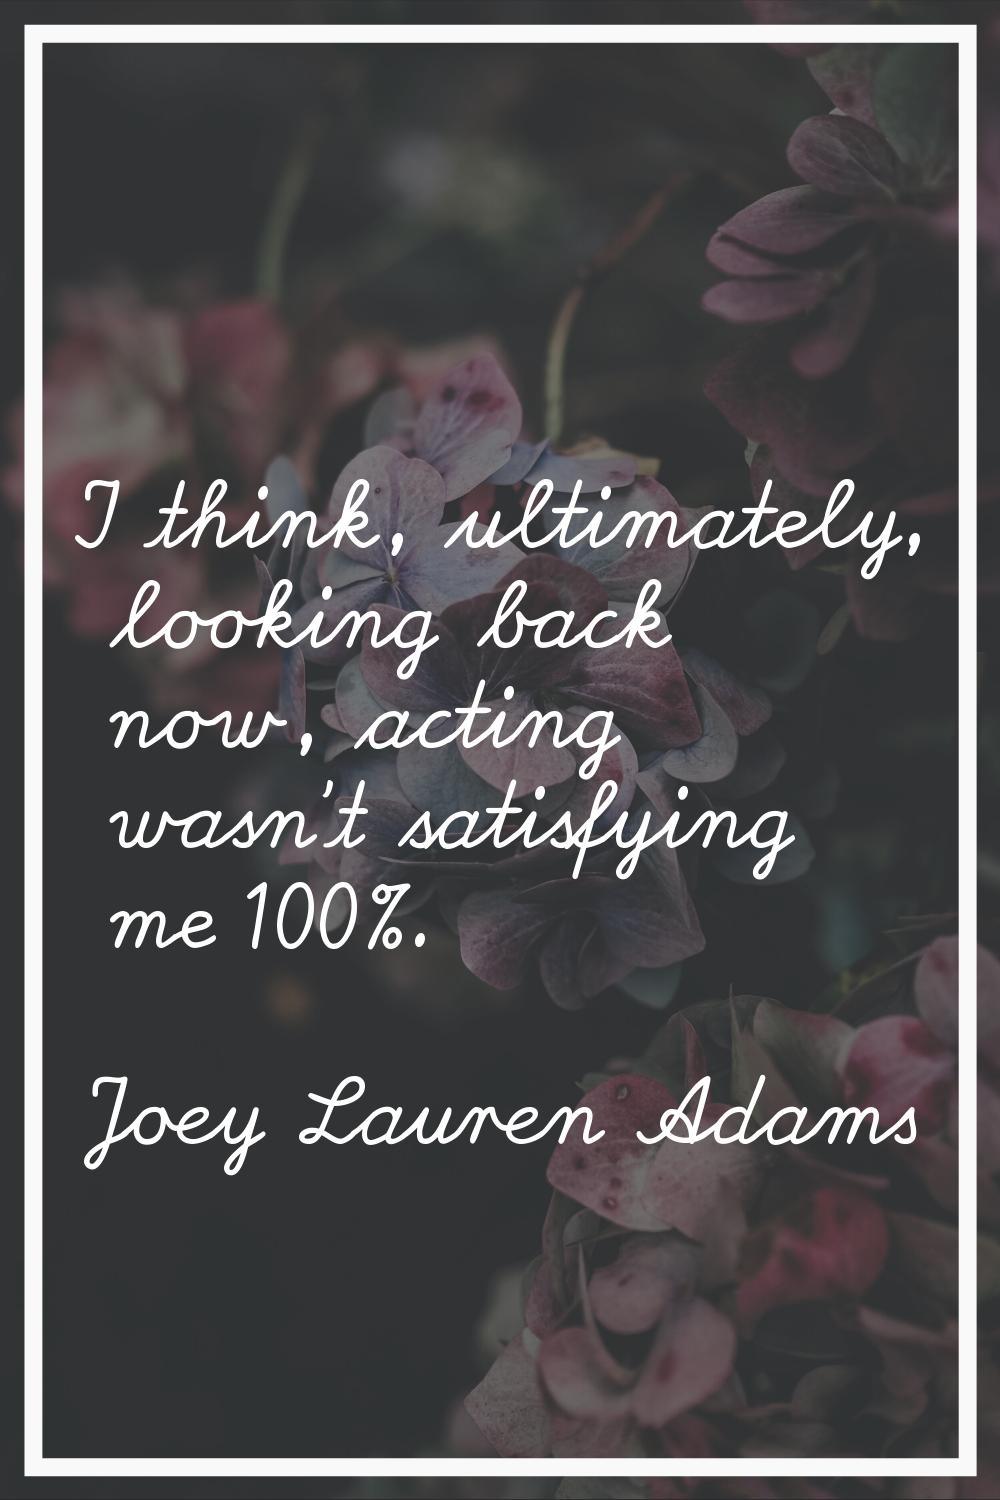 I think, ultimately, looking back now, acting wasn't satisfying me 100%.